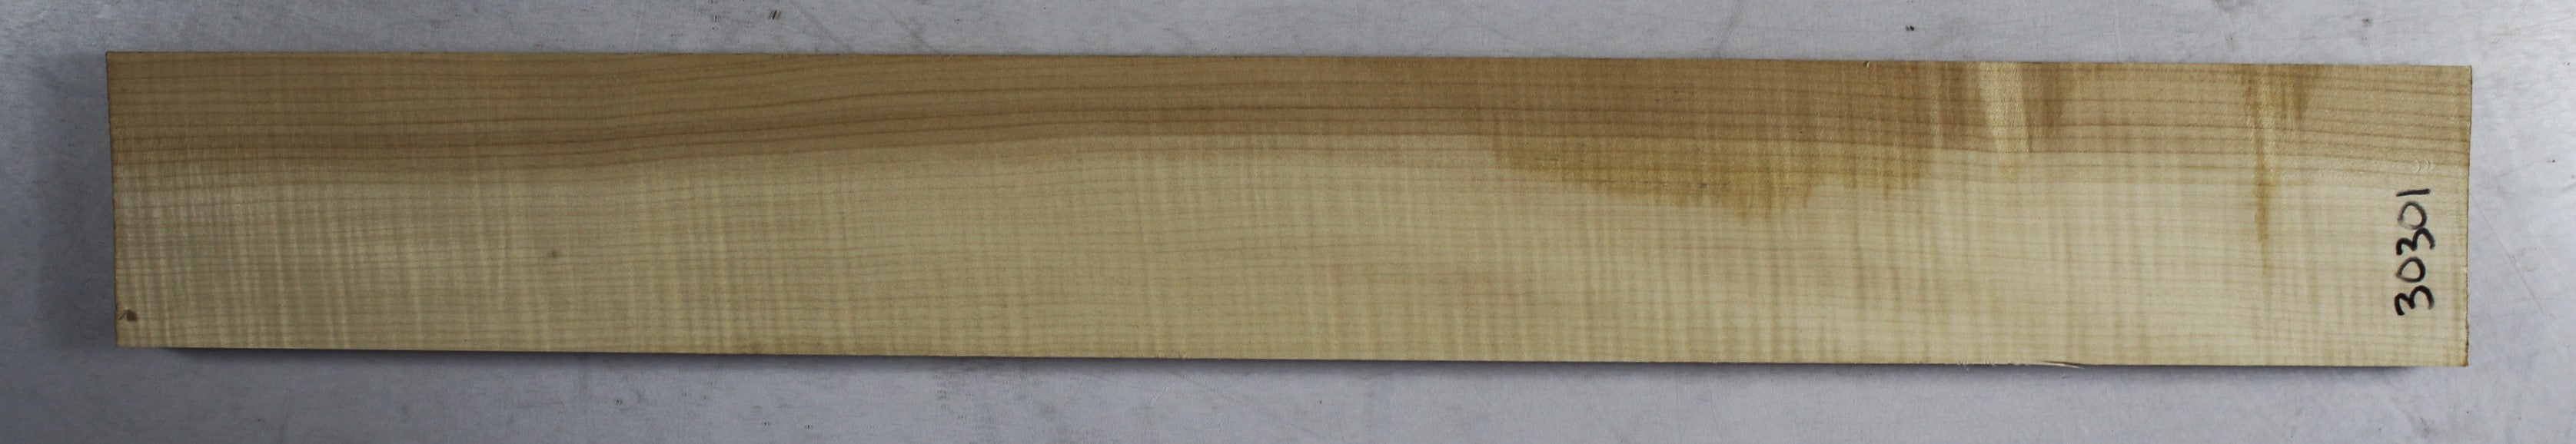 Maple Flame neck blank 0.95" x 4.25" x 34.25" (+3A FIGURED) - Stock# 3-0301